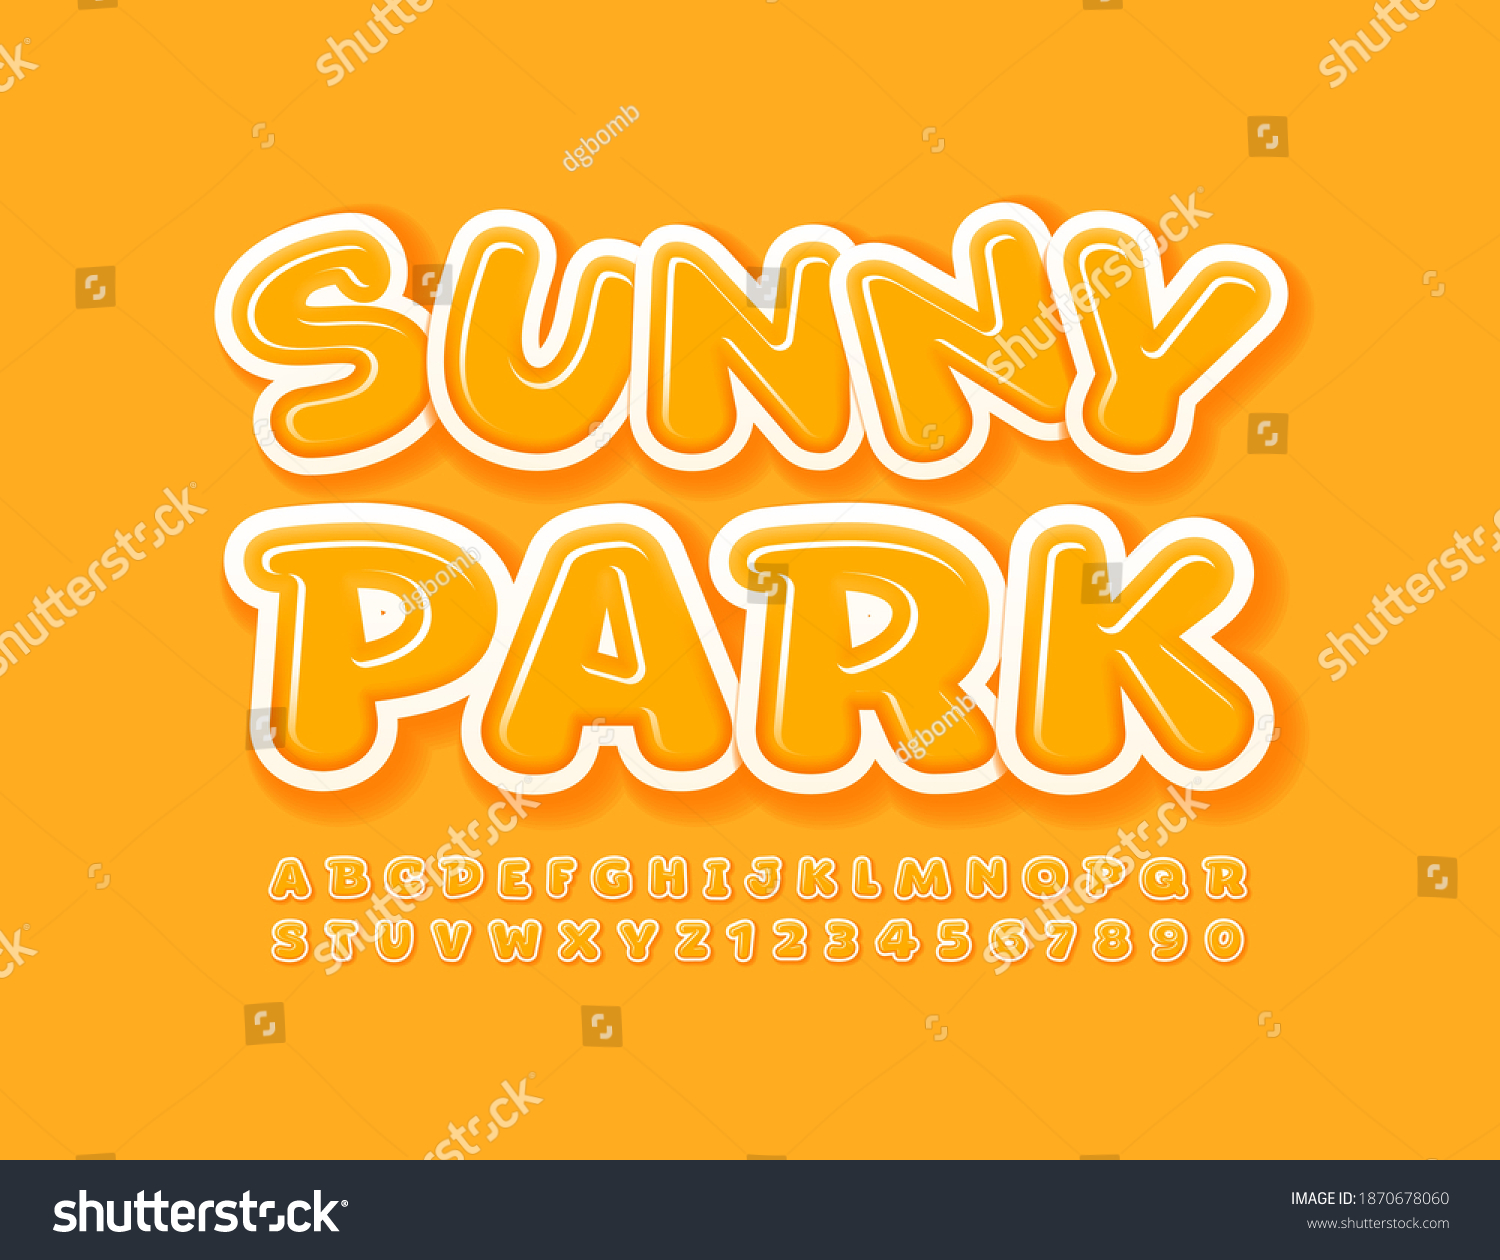 13,692 Sunny font Images, Stock Photos & Vectors | Shutterstock